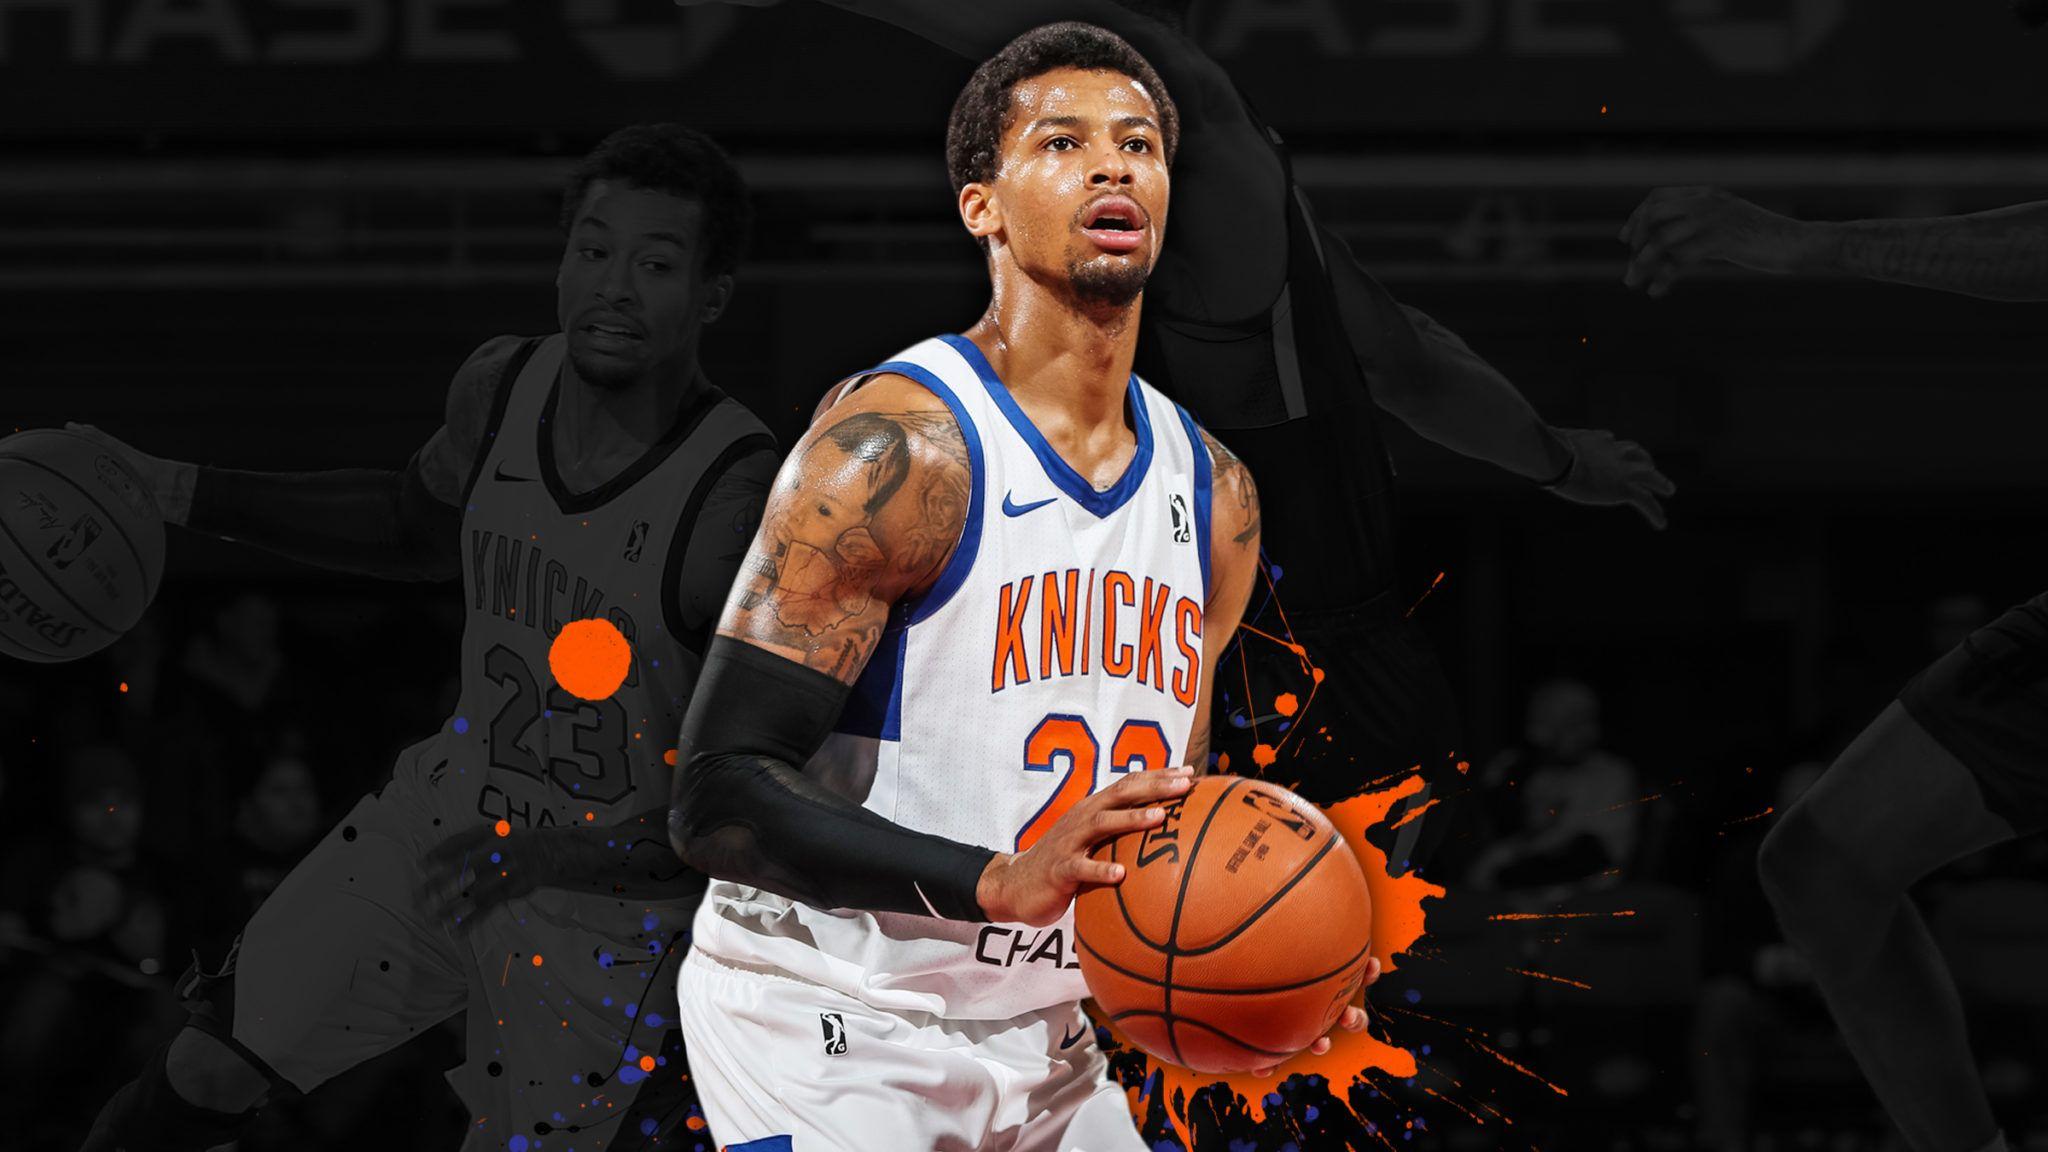 Knicks news: New York moves further in contract talks with Trey Burke